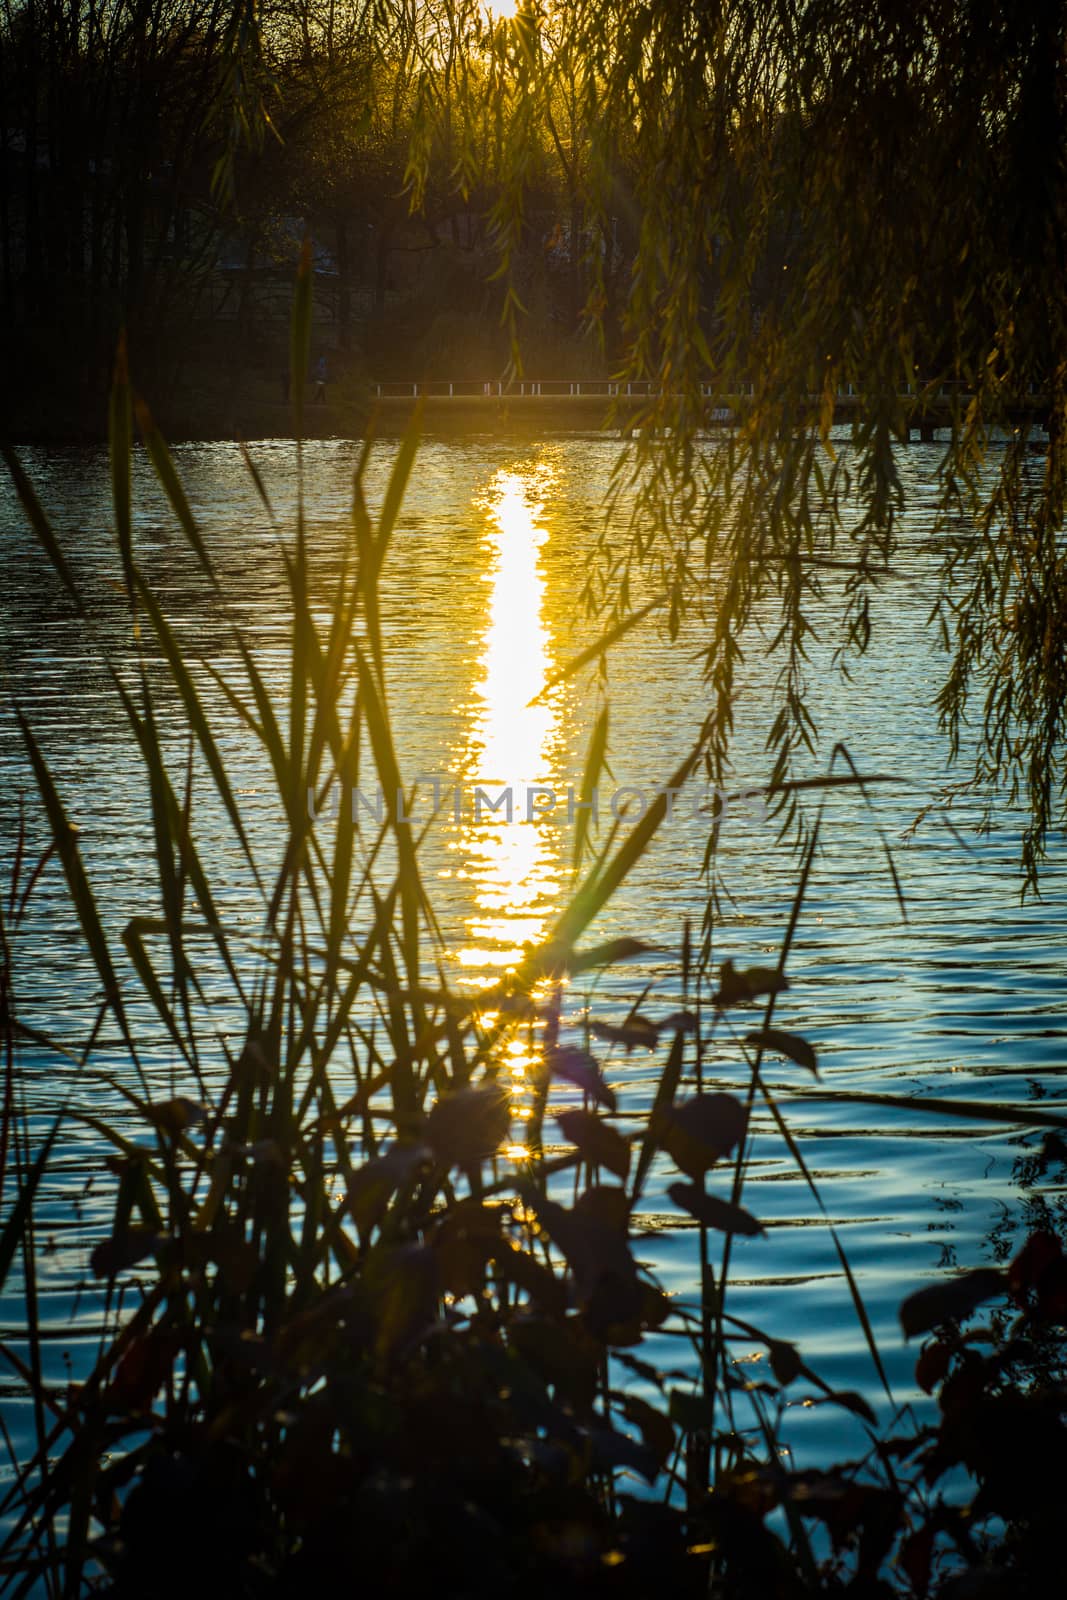 The golden evening sun shines on the water of the lake by Serhii_Voroshchuk